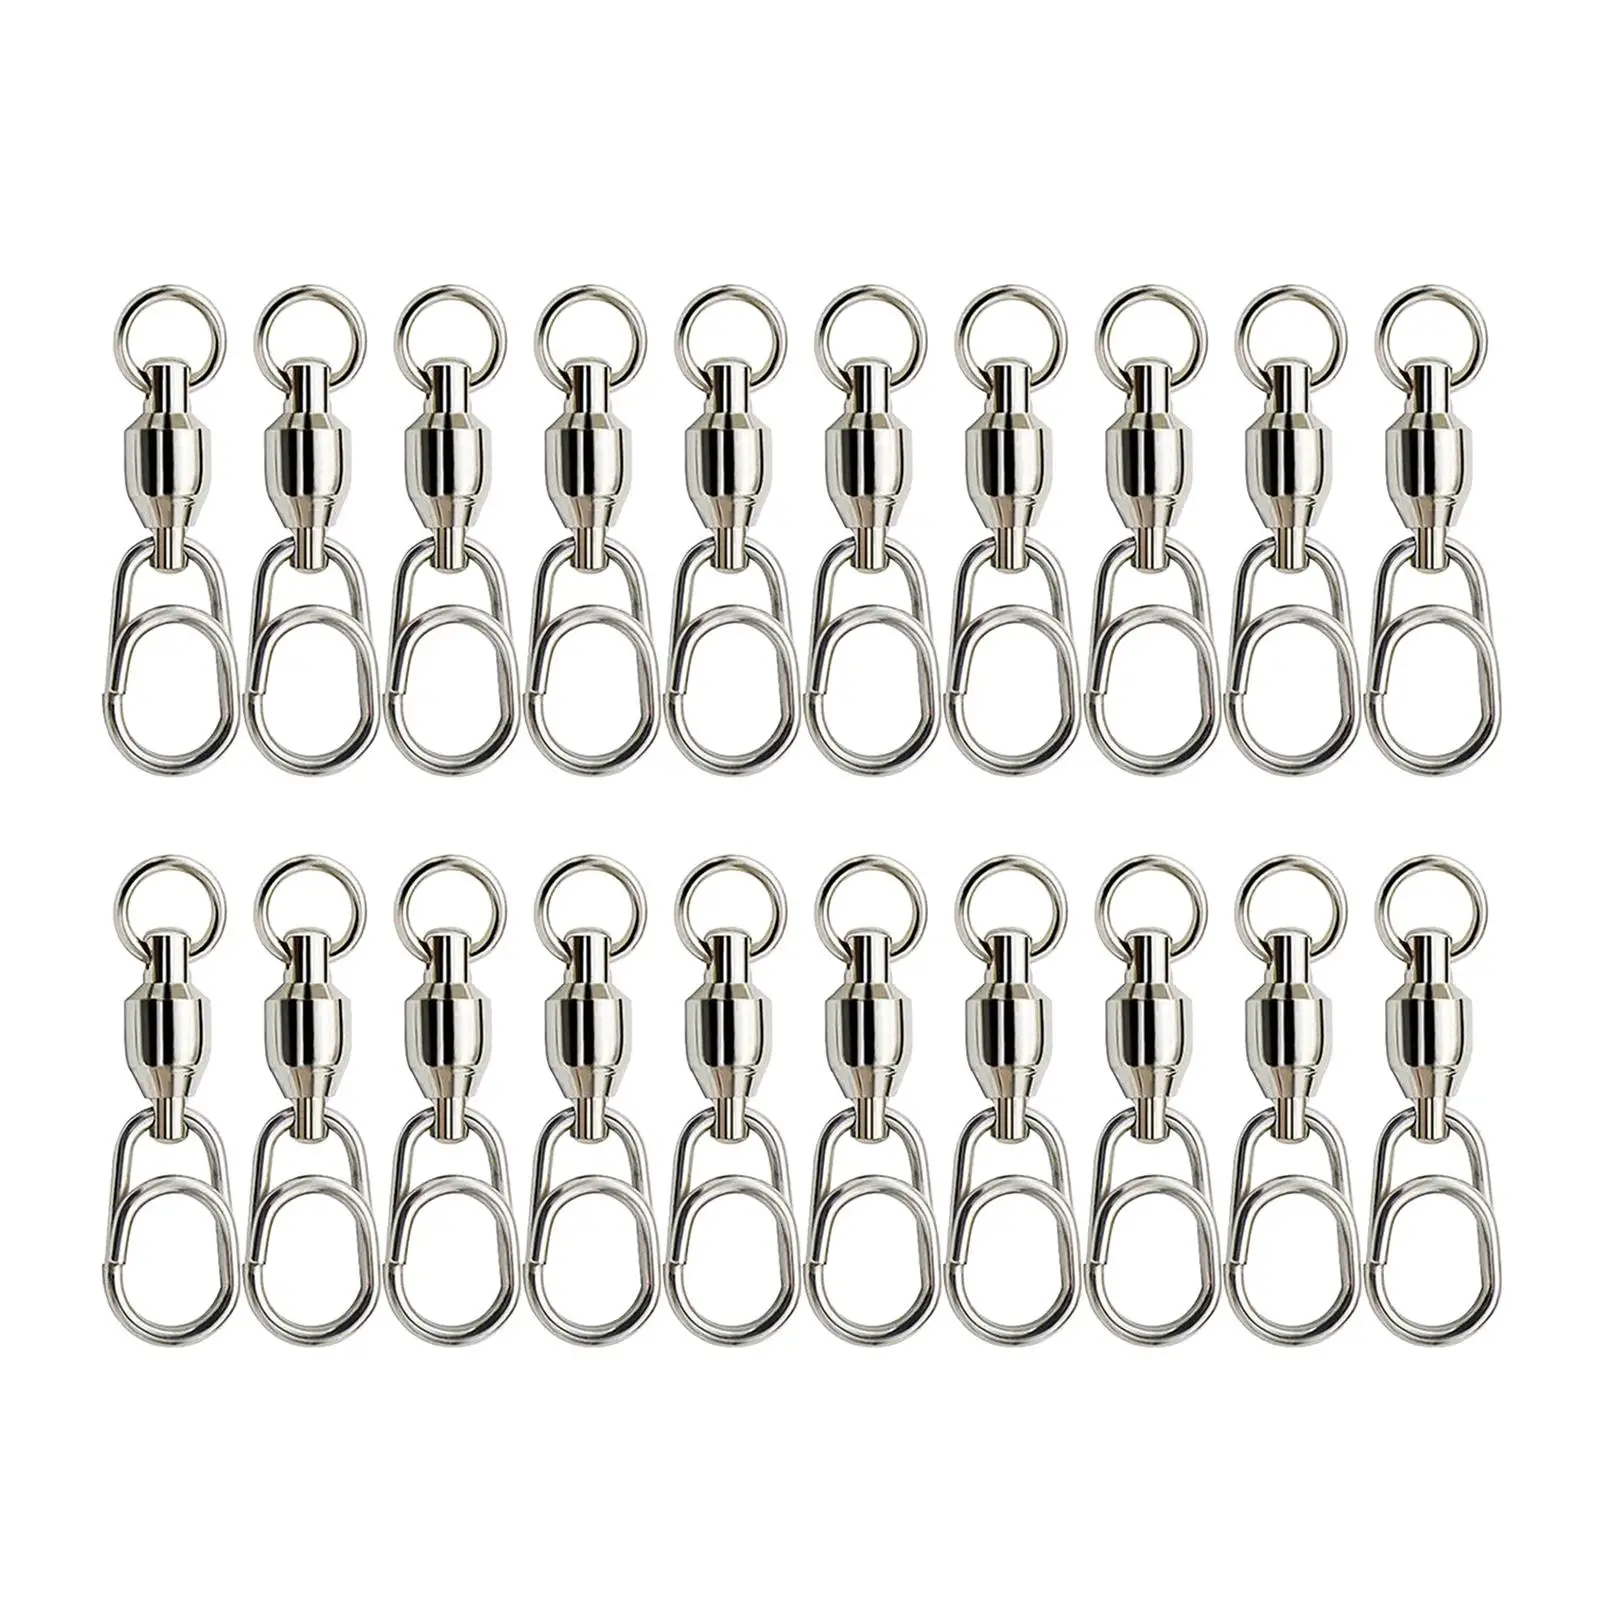 Fishing Micro Swivels Stainless Steel Material Fishing Ball Bearing Swivels  Connector Fishing Tackle Accessories